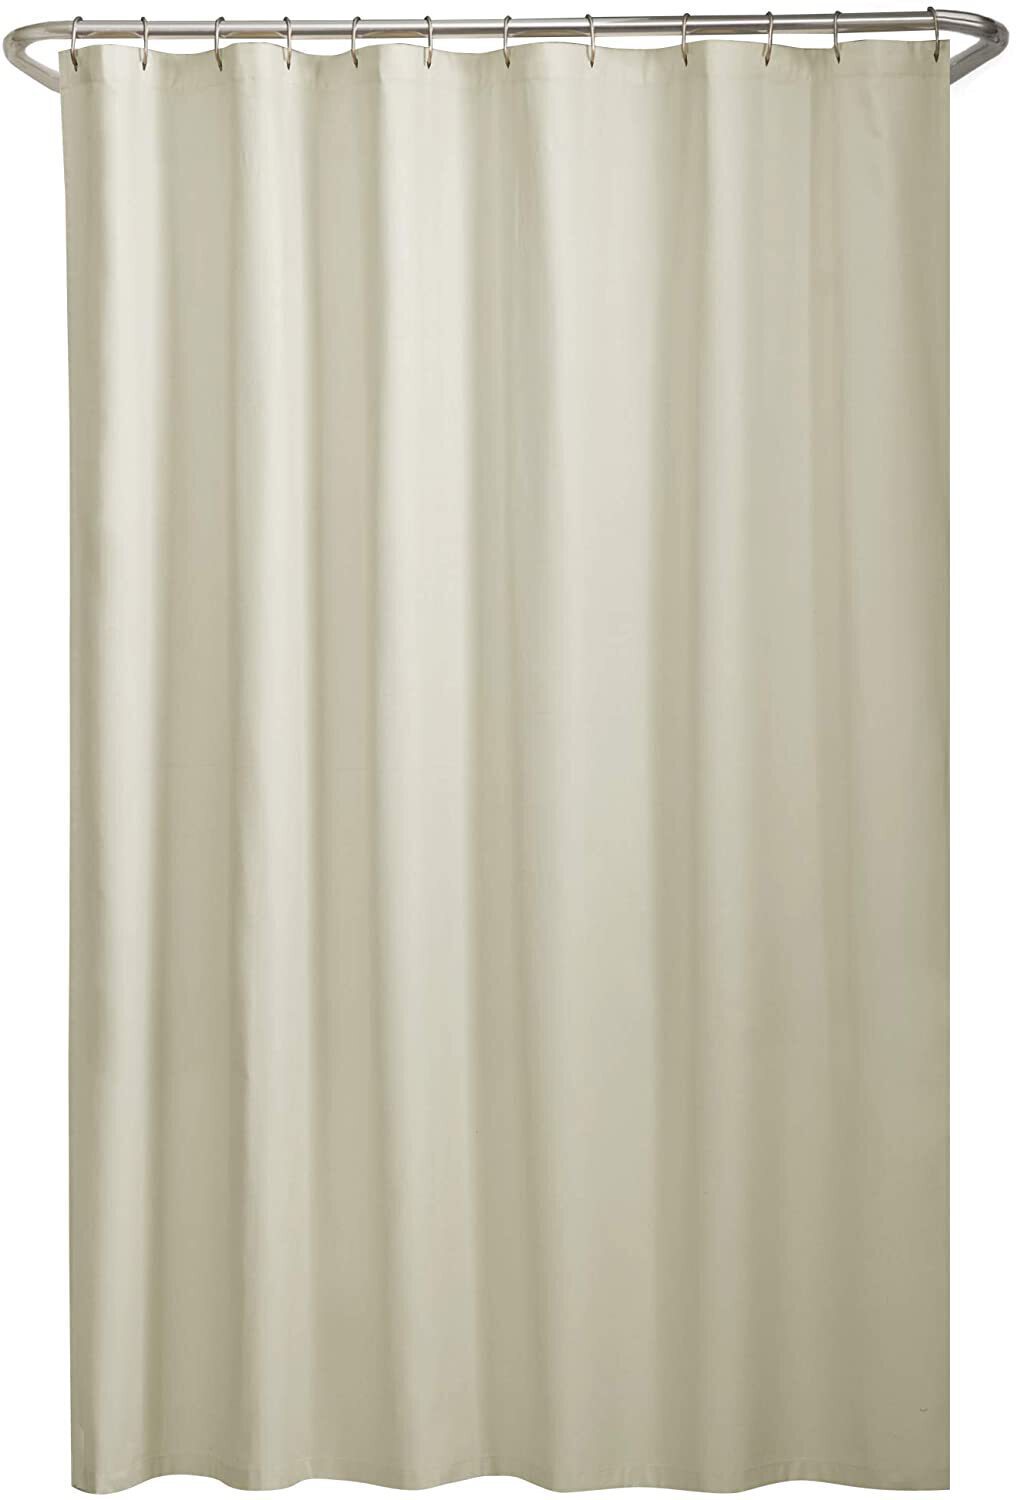 Maytex Water Repellent Shower Curtain Liner